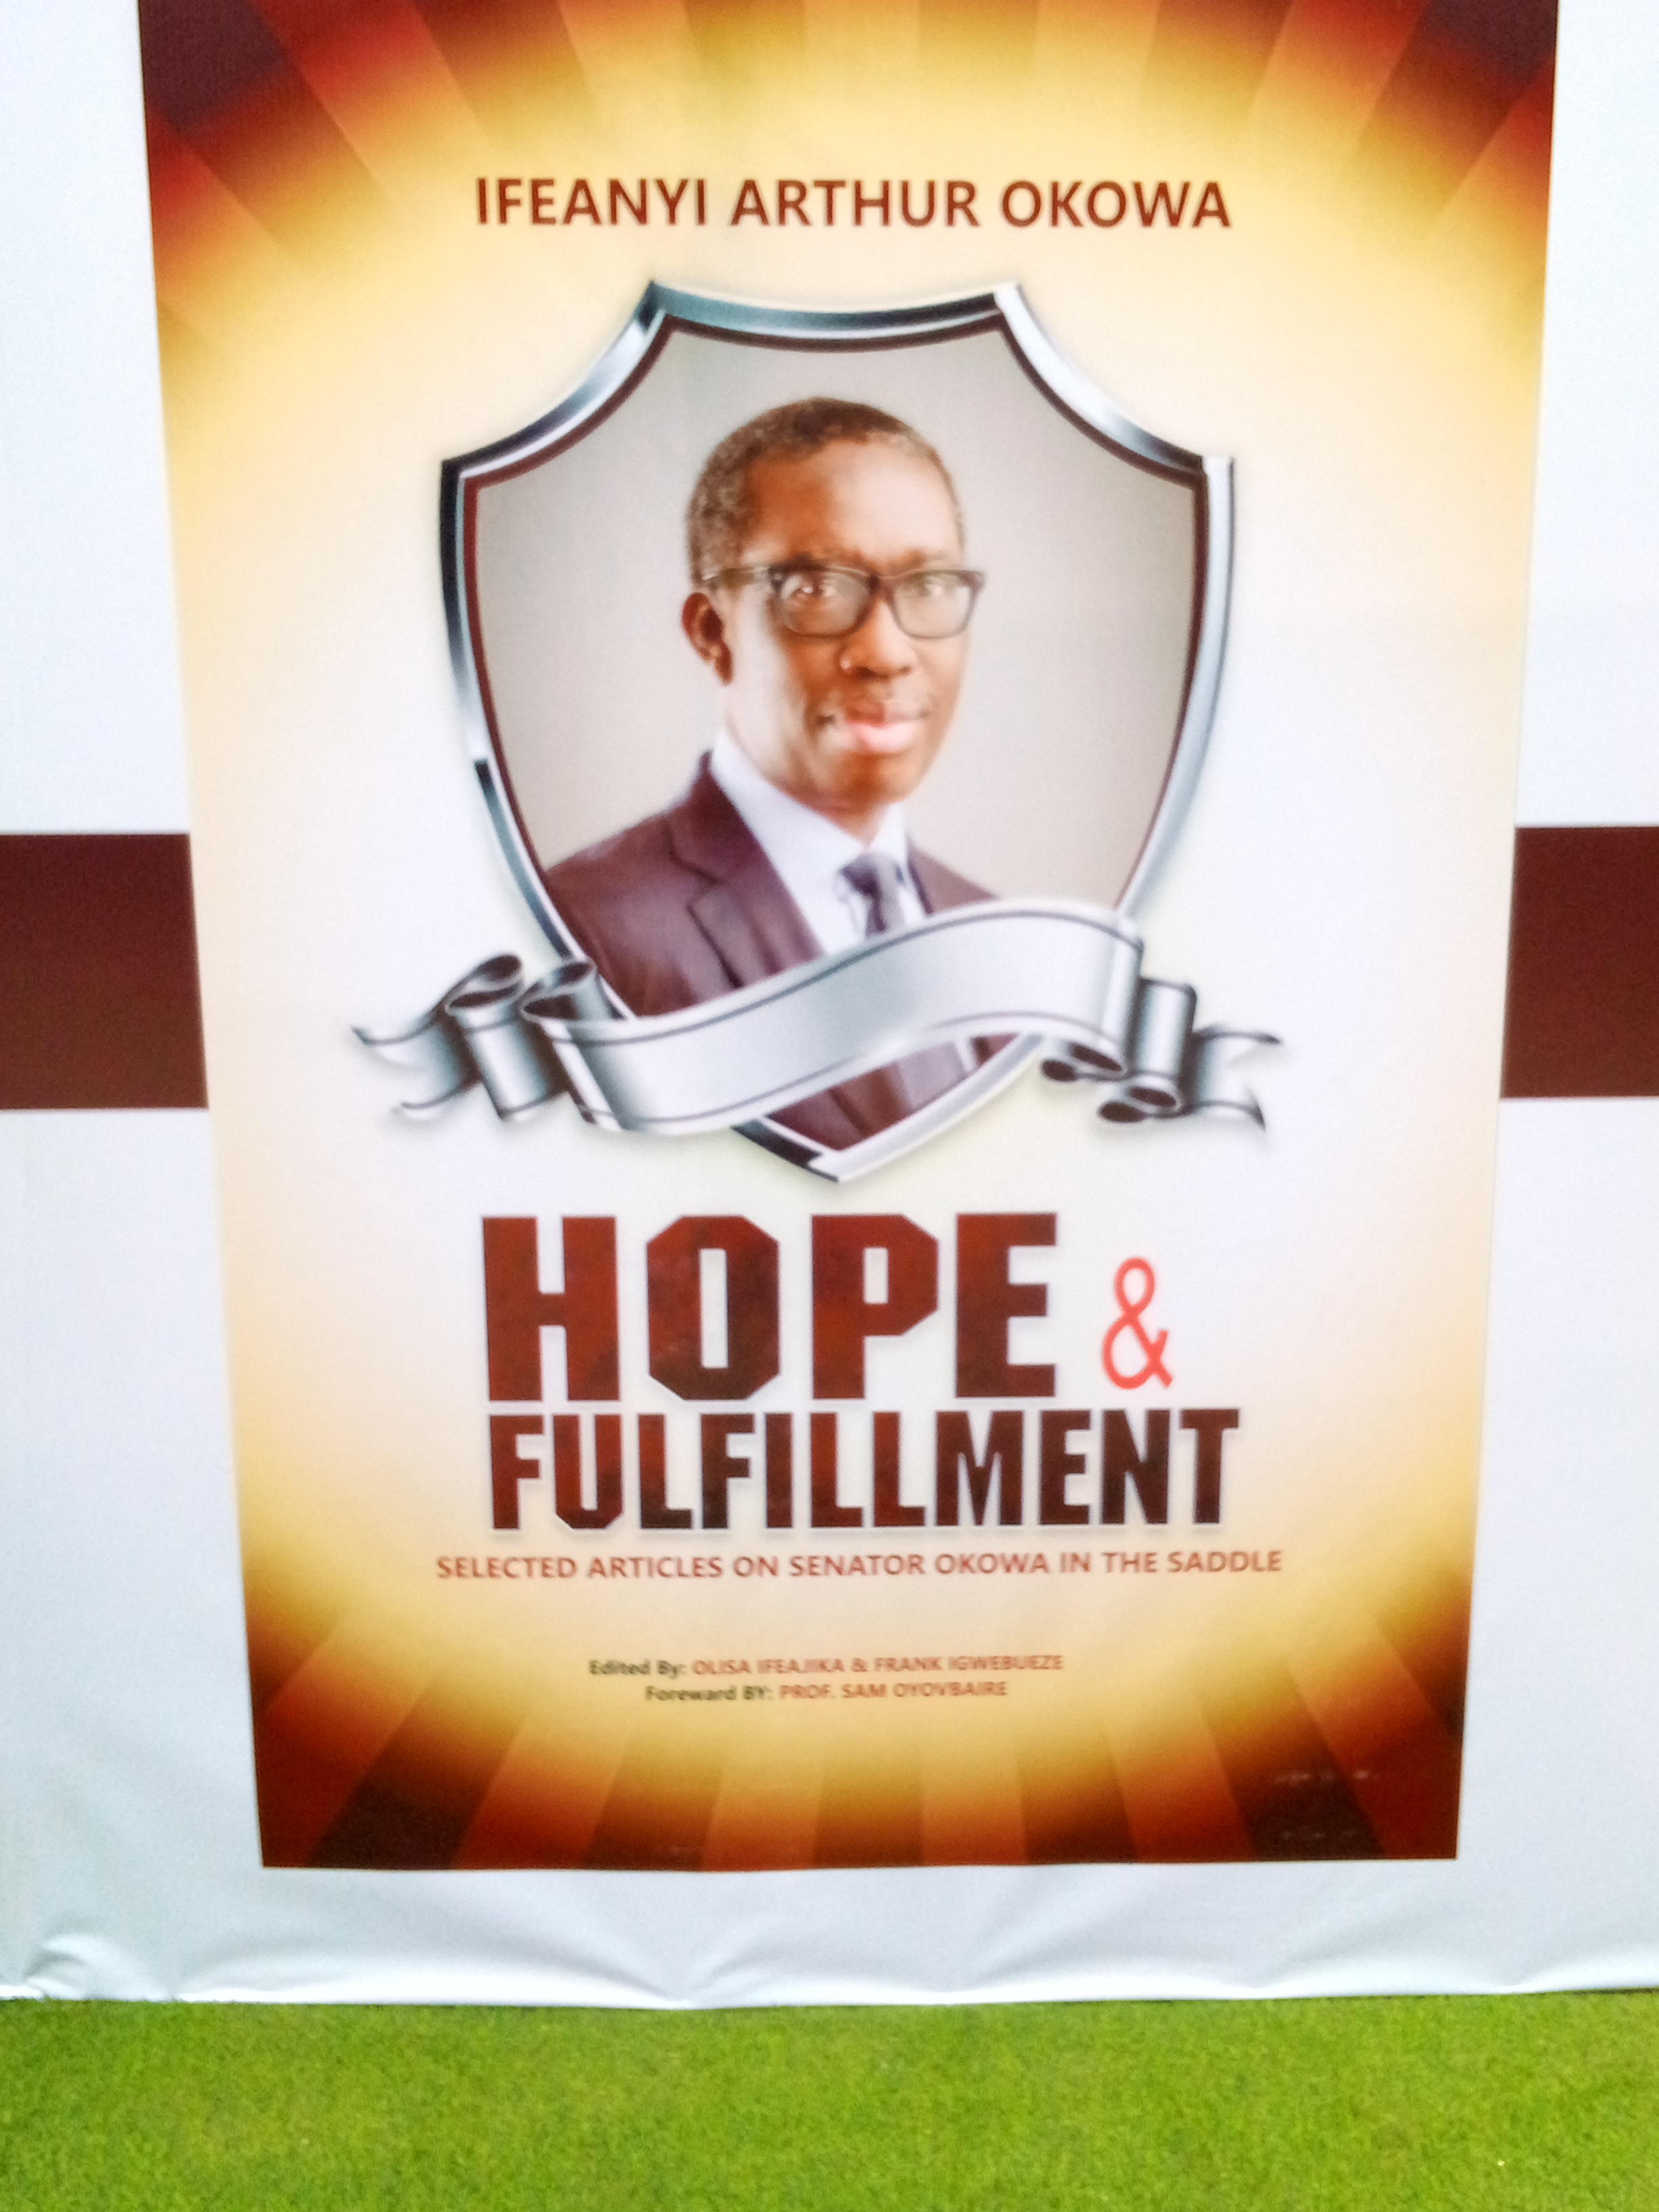 BOOK REVIEW – Hope & Fulfillment: Review by Prof Emanuel Ufuophu-Biri